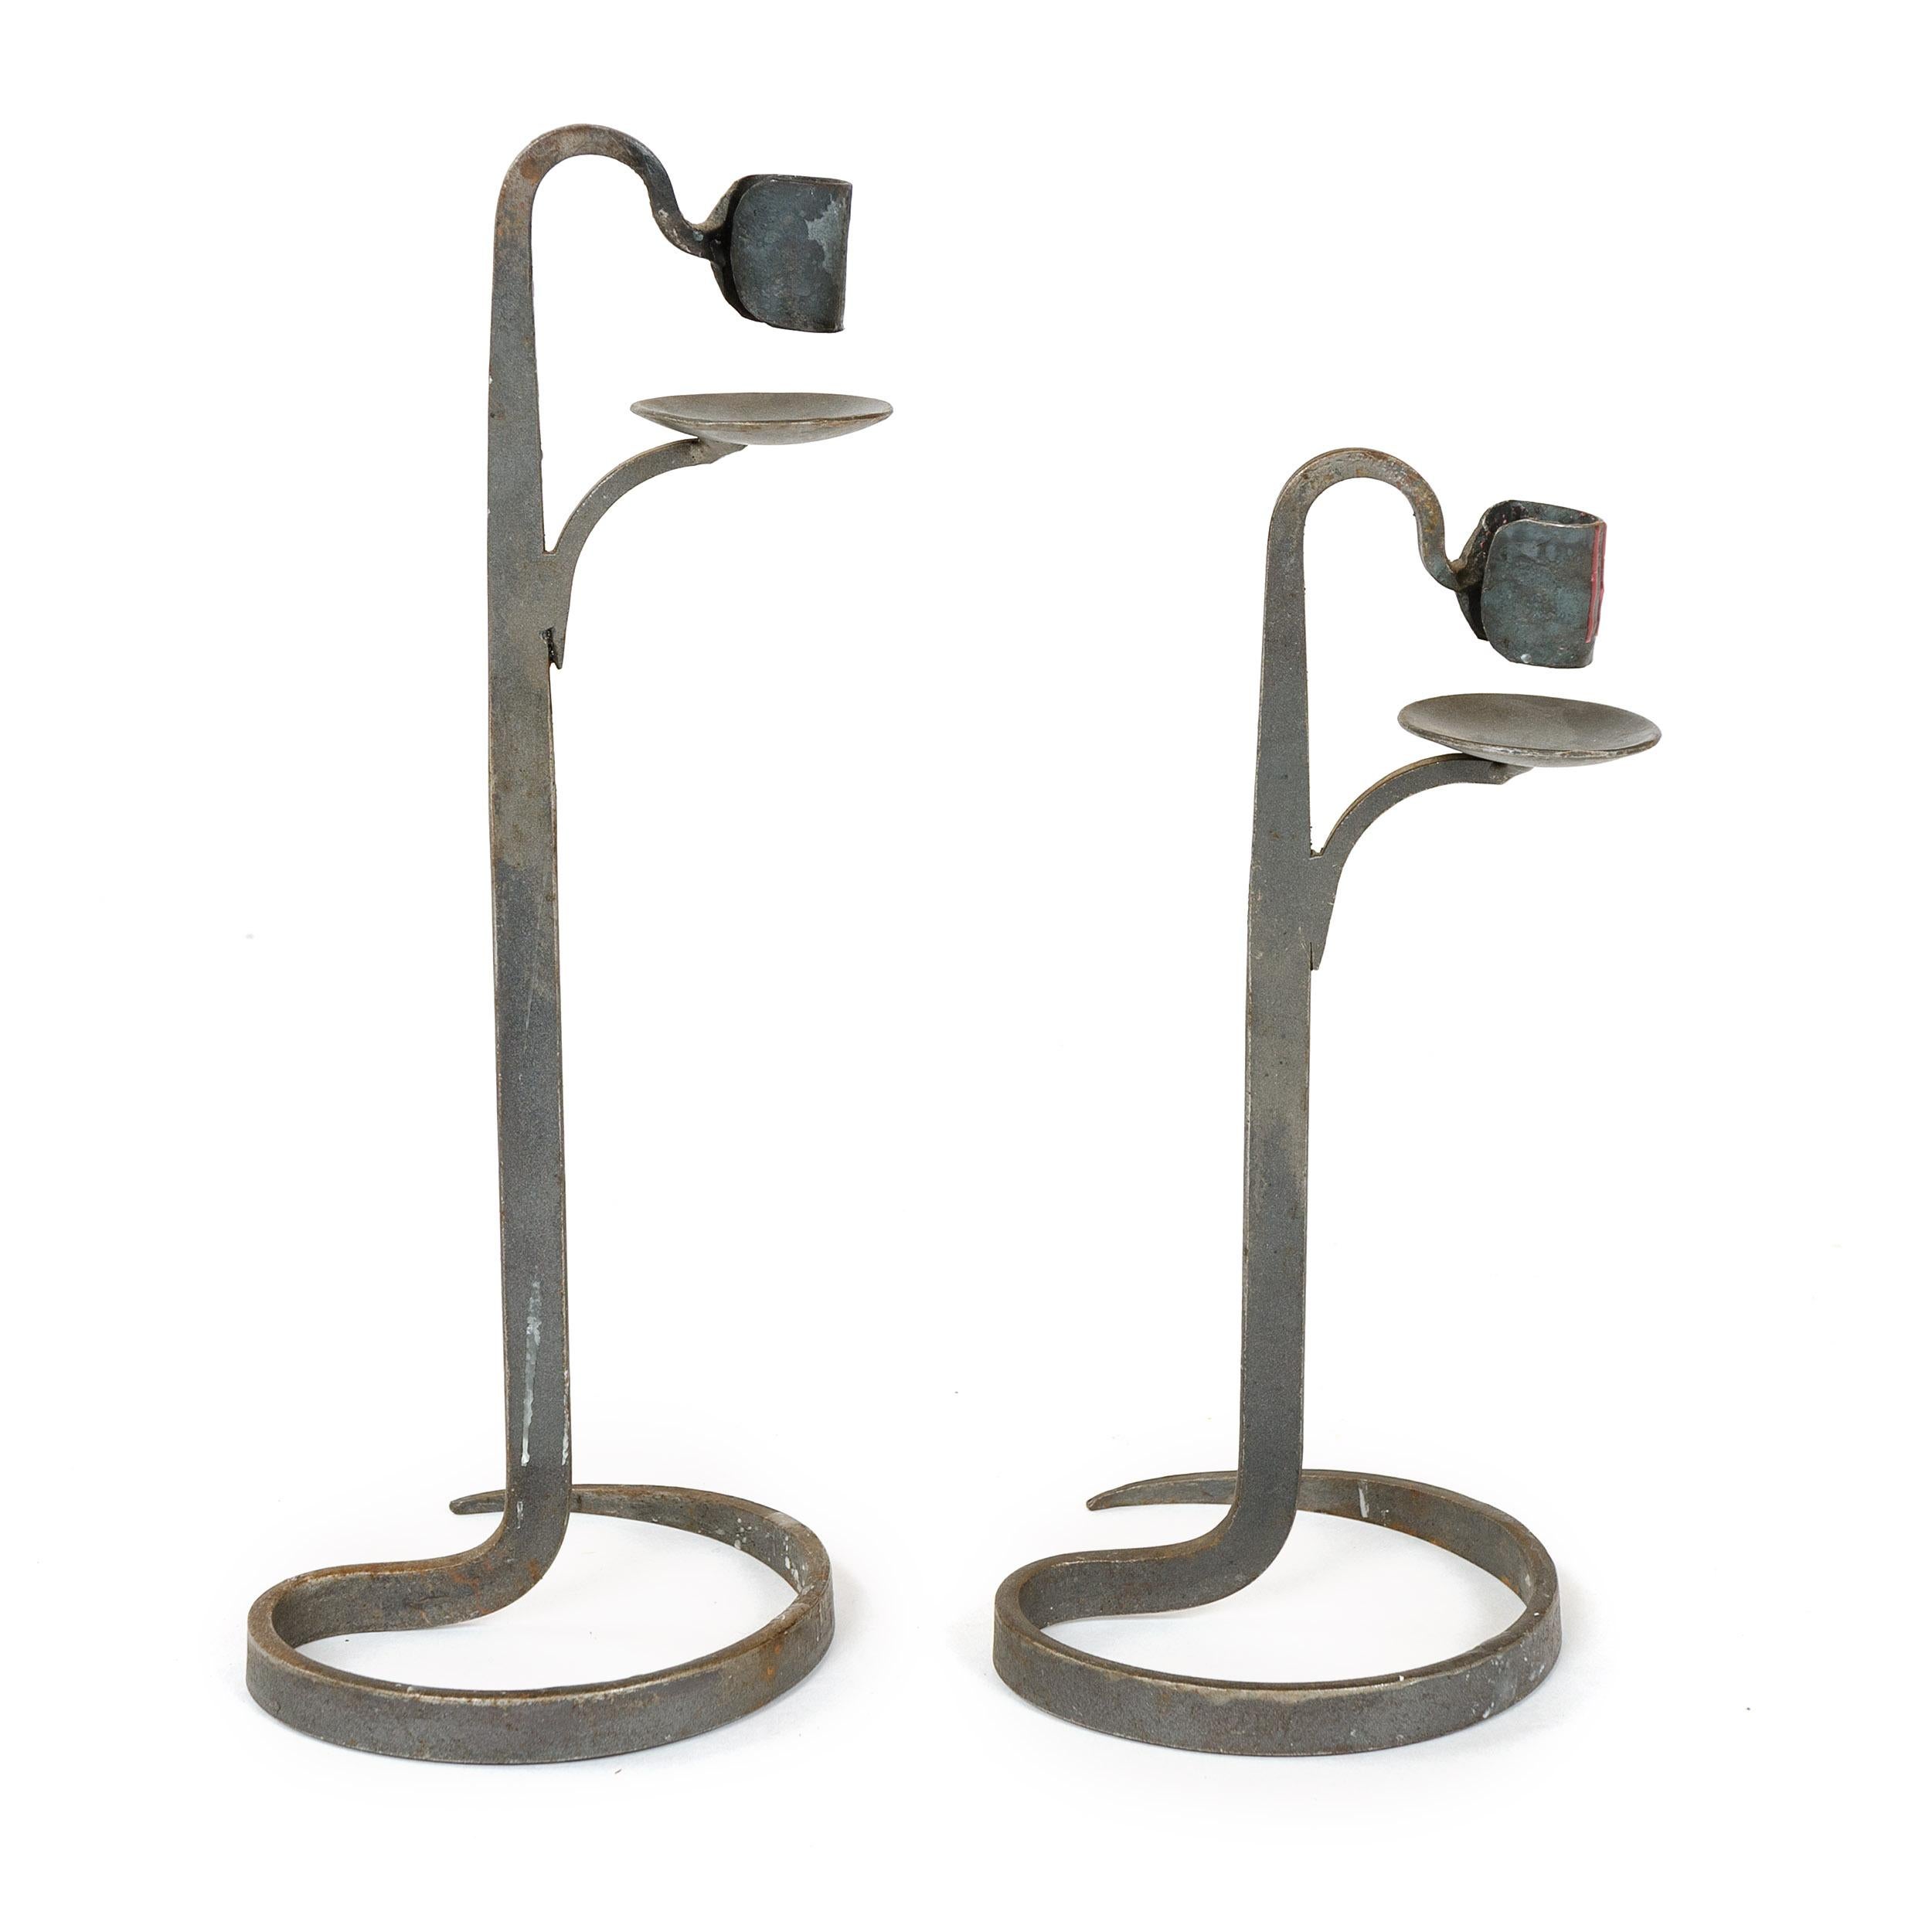 A pair of handwrought standing iron candleholders.